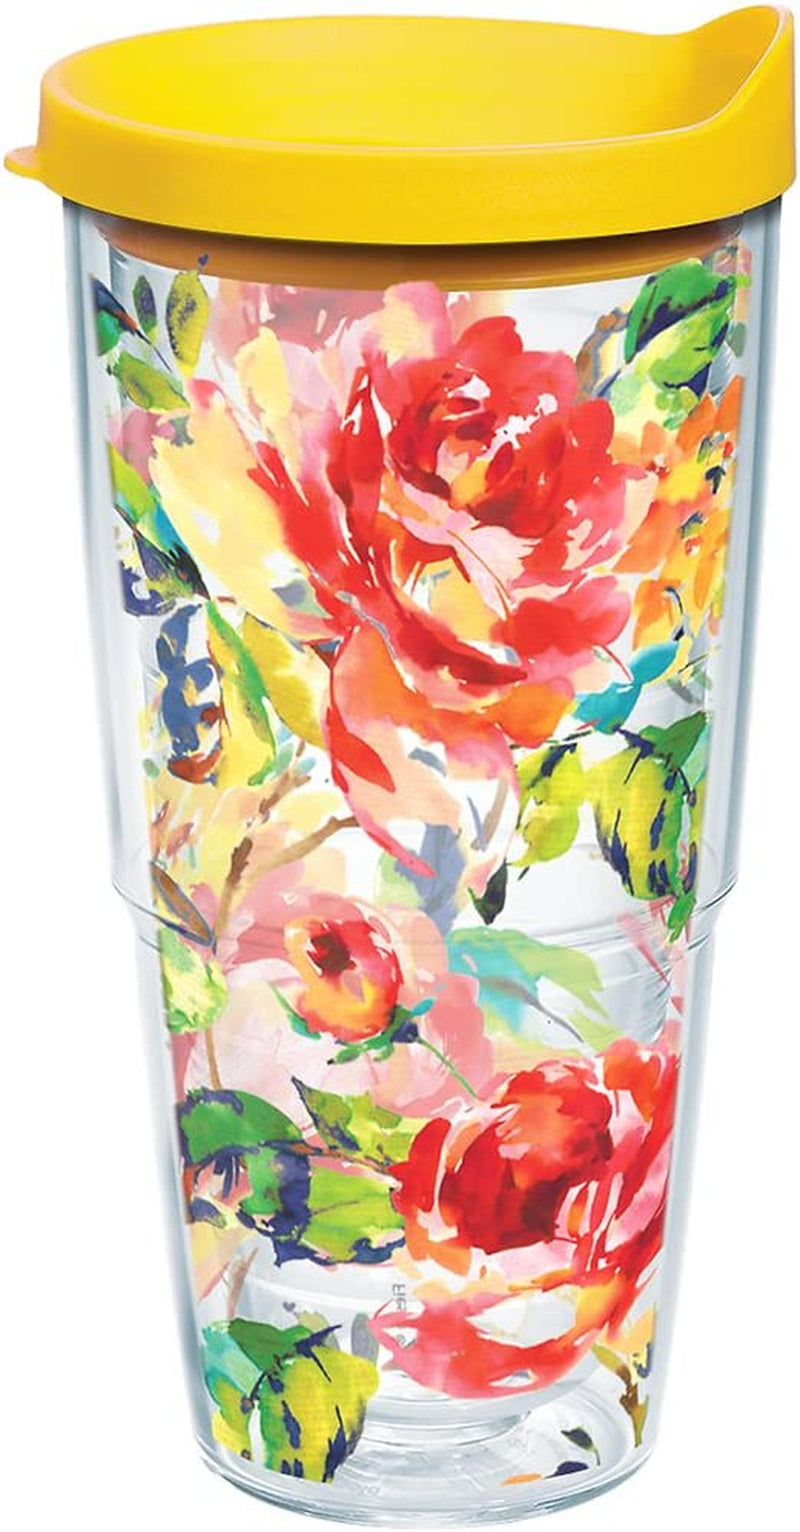 Tervis Triple Walled Fiesta Insulated Tumbler Cup Keeps Drinks Cold & Hot, 20Oz - Stainless Steel, Floral Bouquet Home & Garden > Kitchen & Dining > Tableware > Drinkware Tervis Classic 24oz 